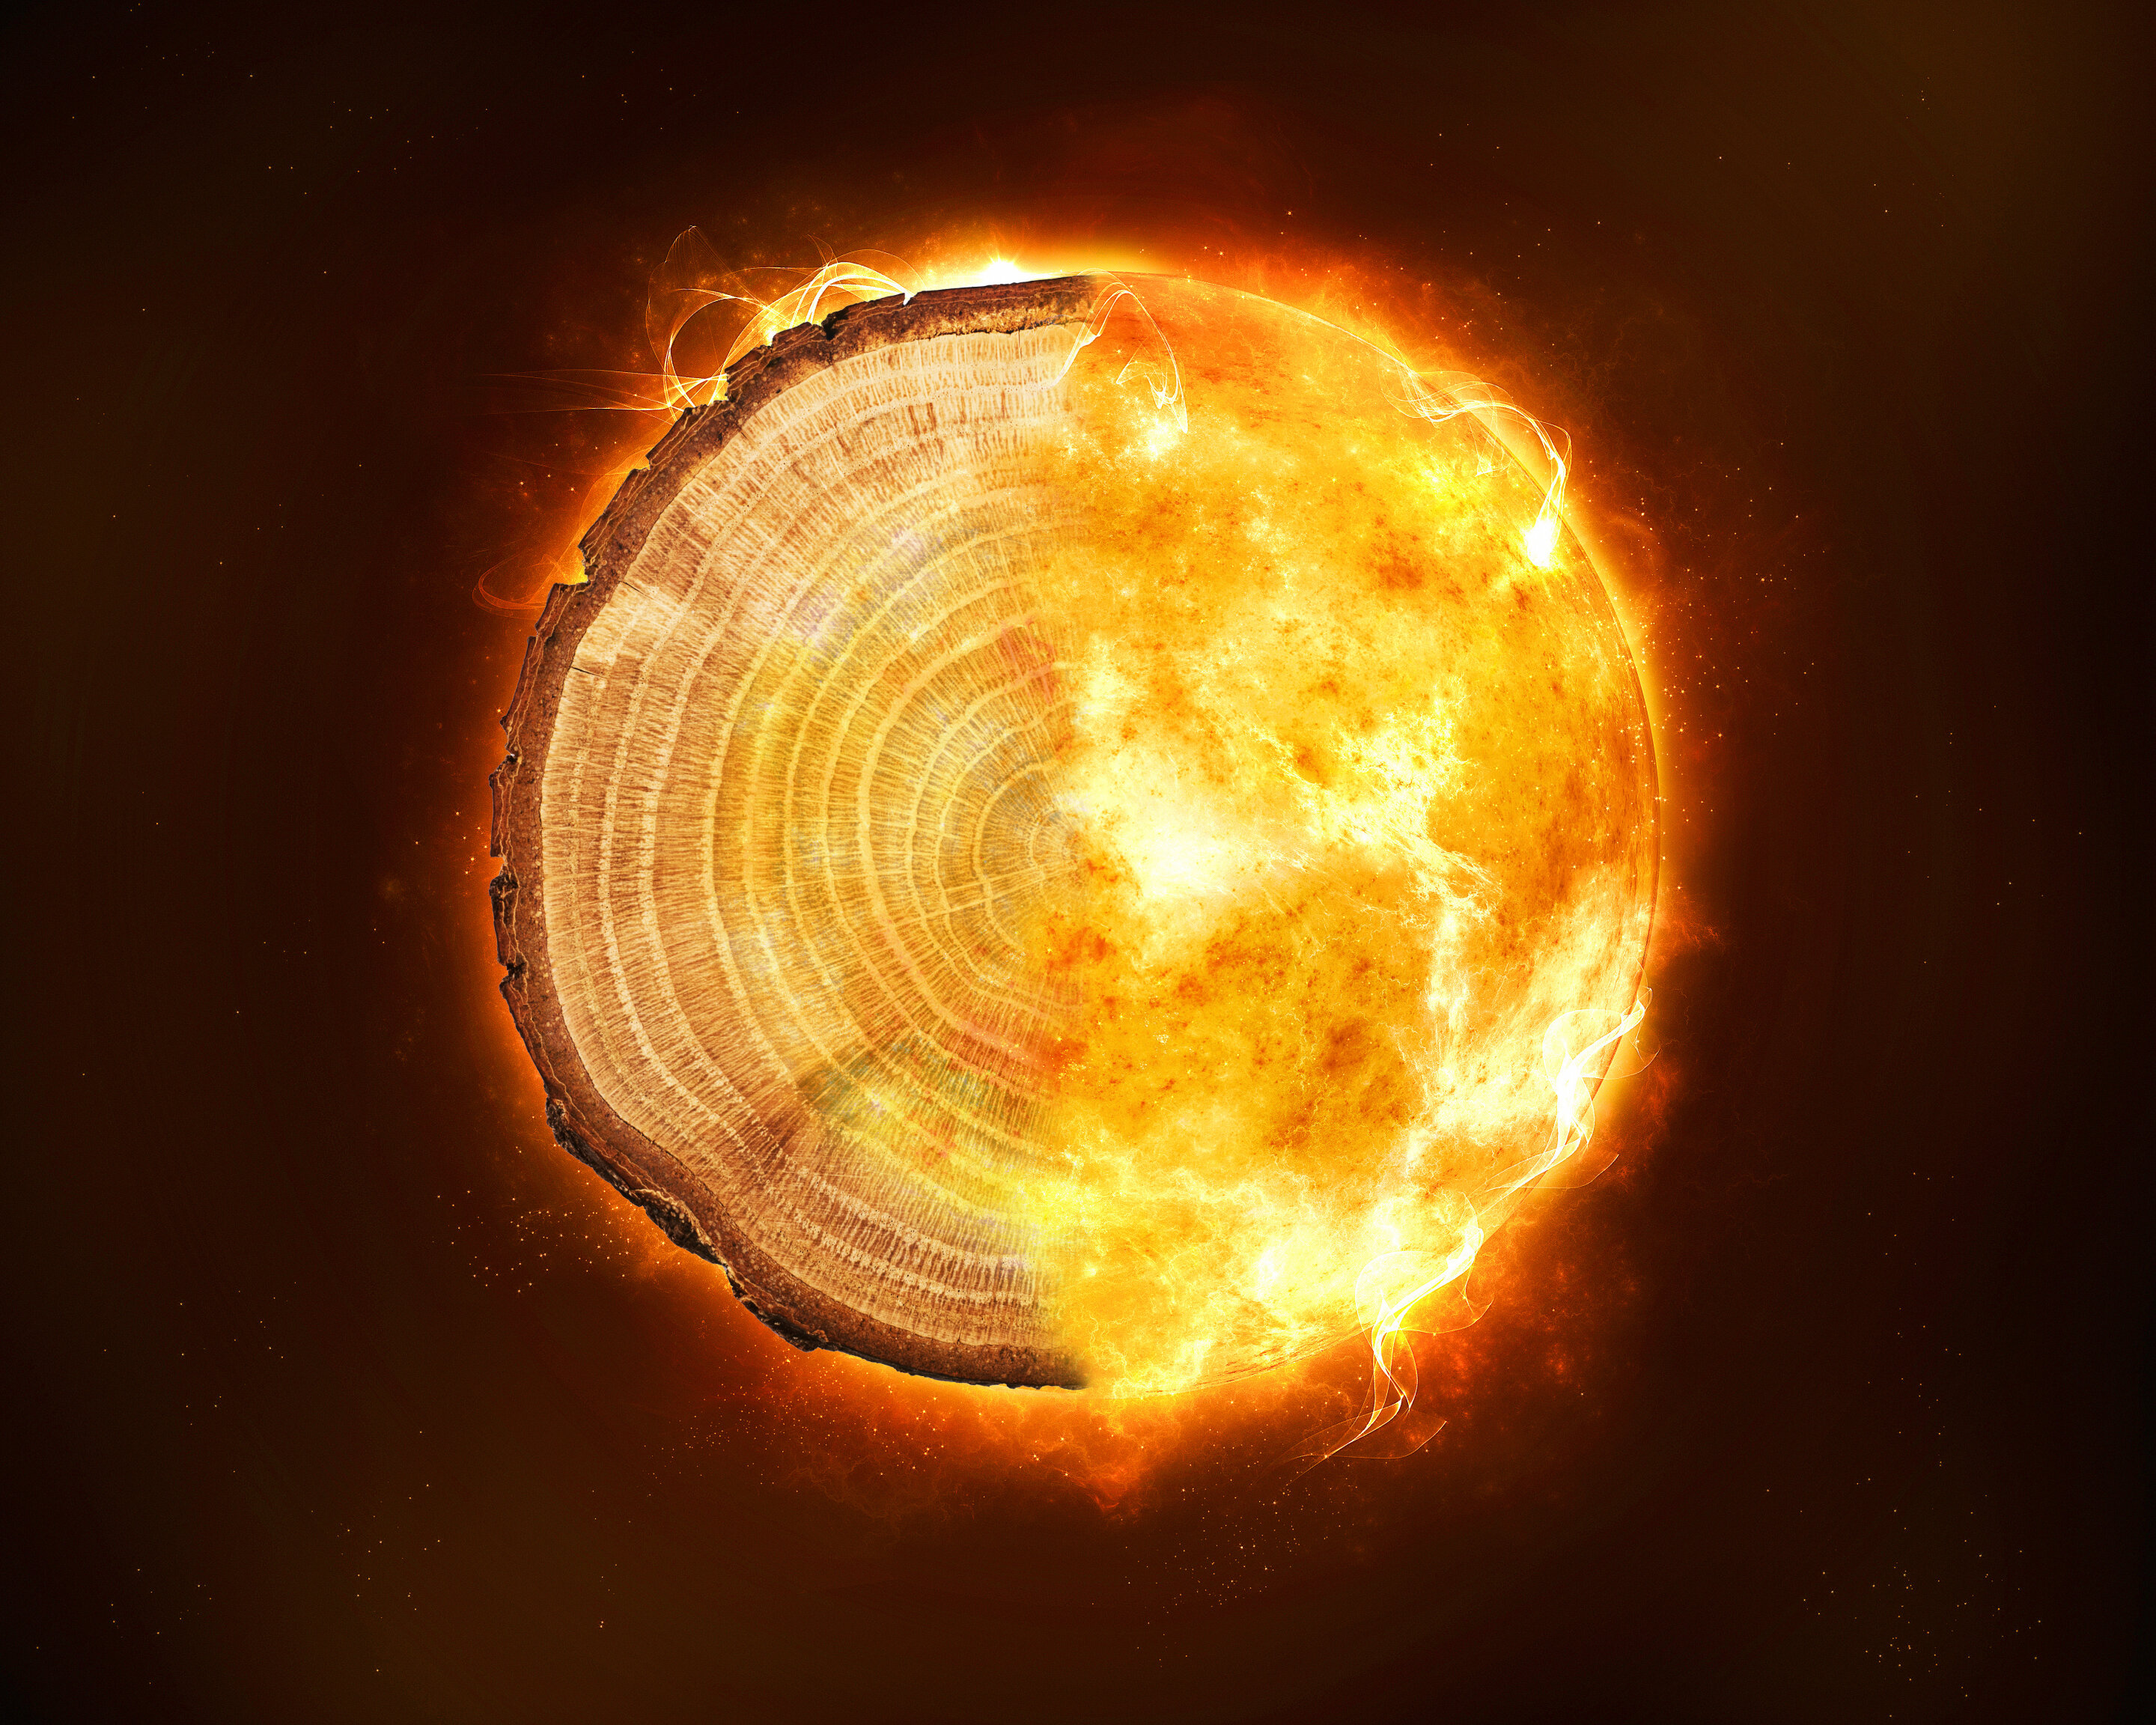 Tree rings give perception into devastating radiation storms